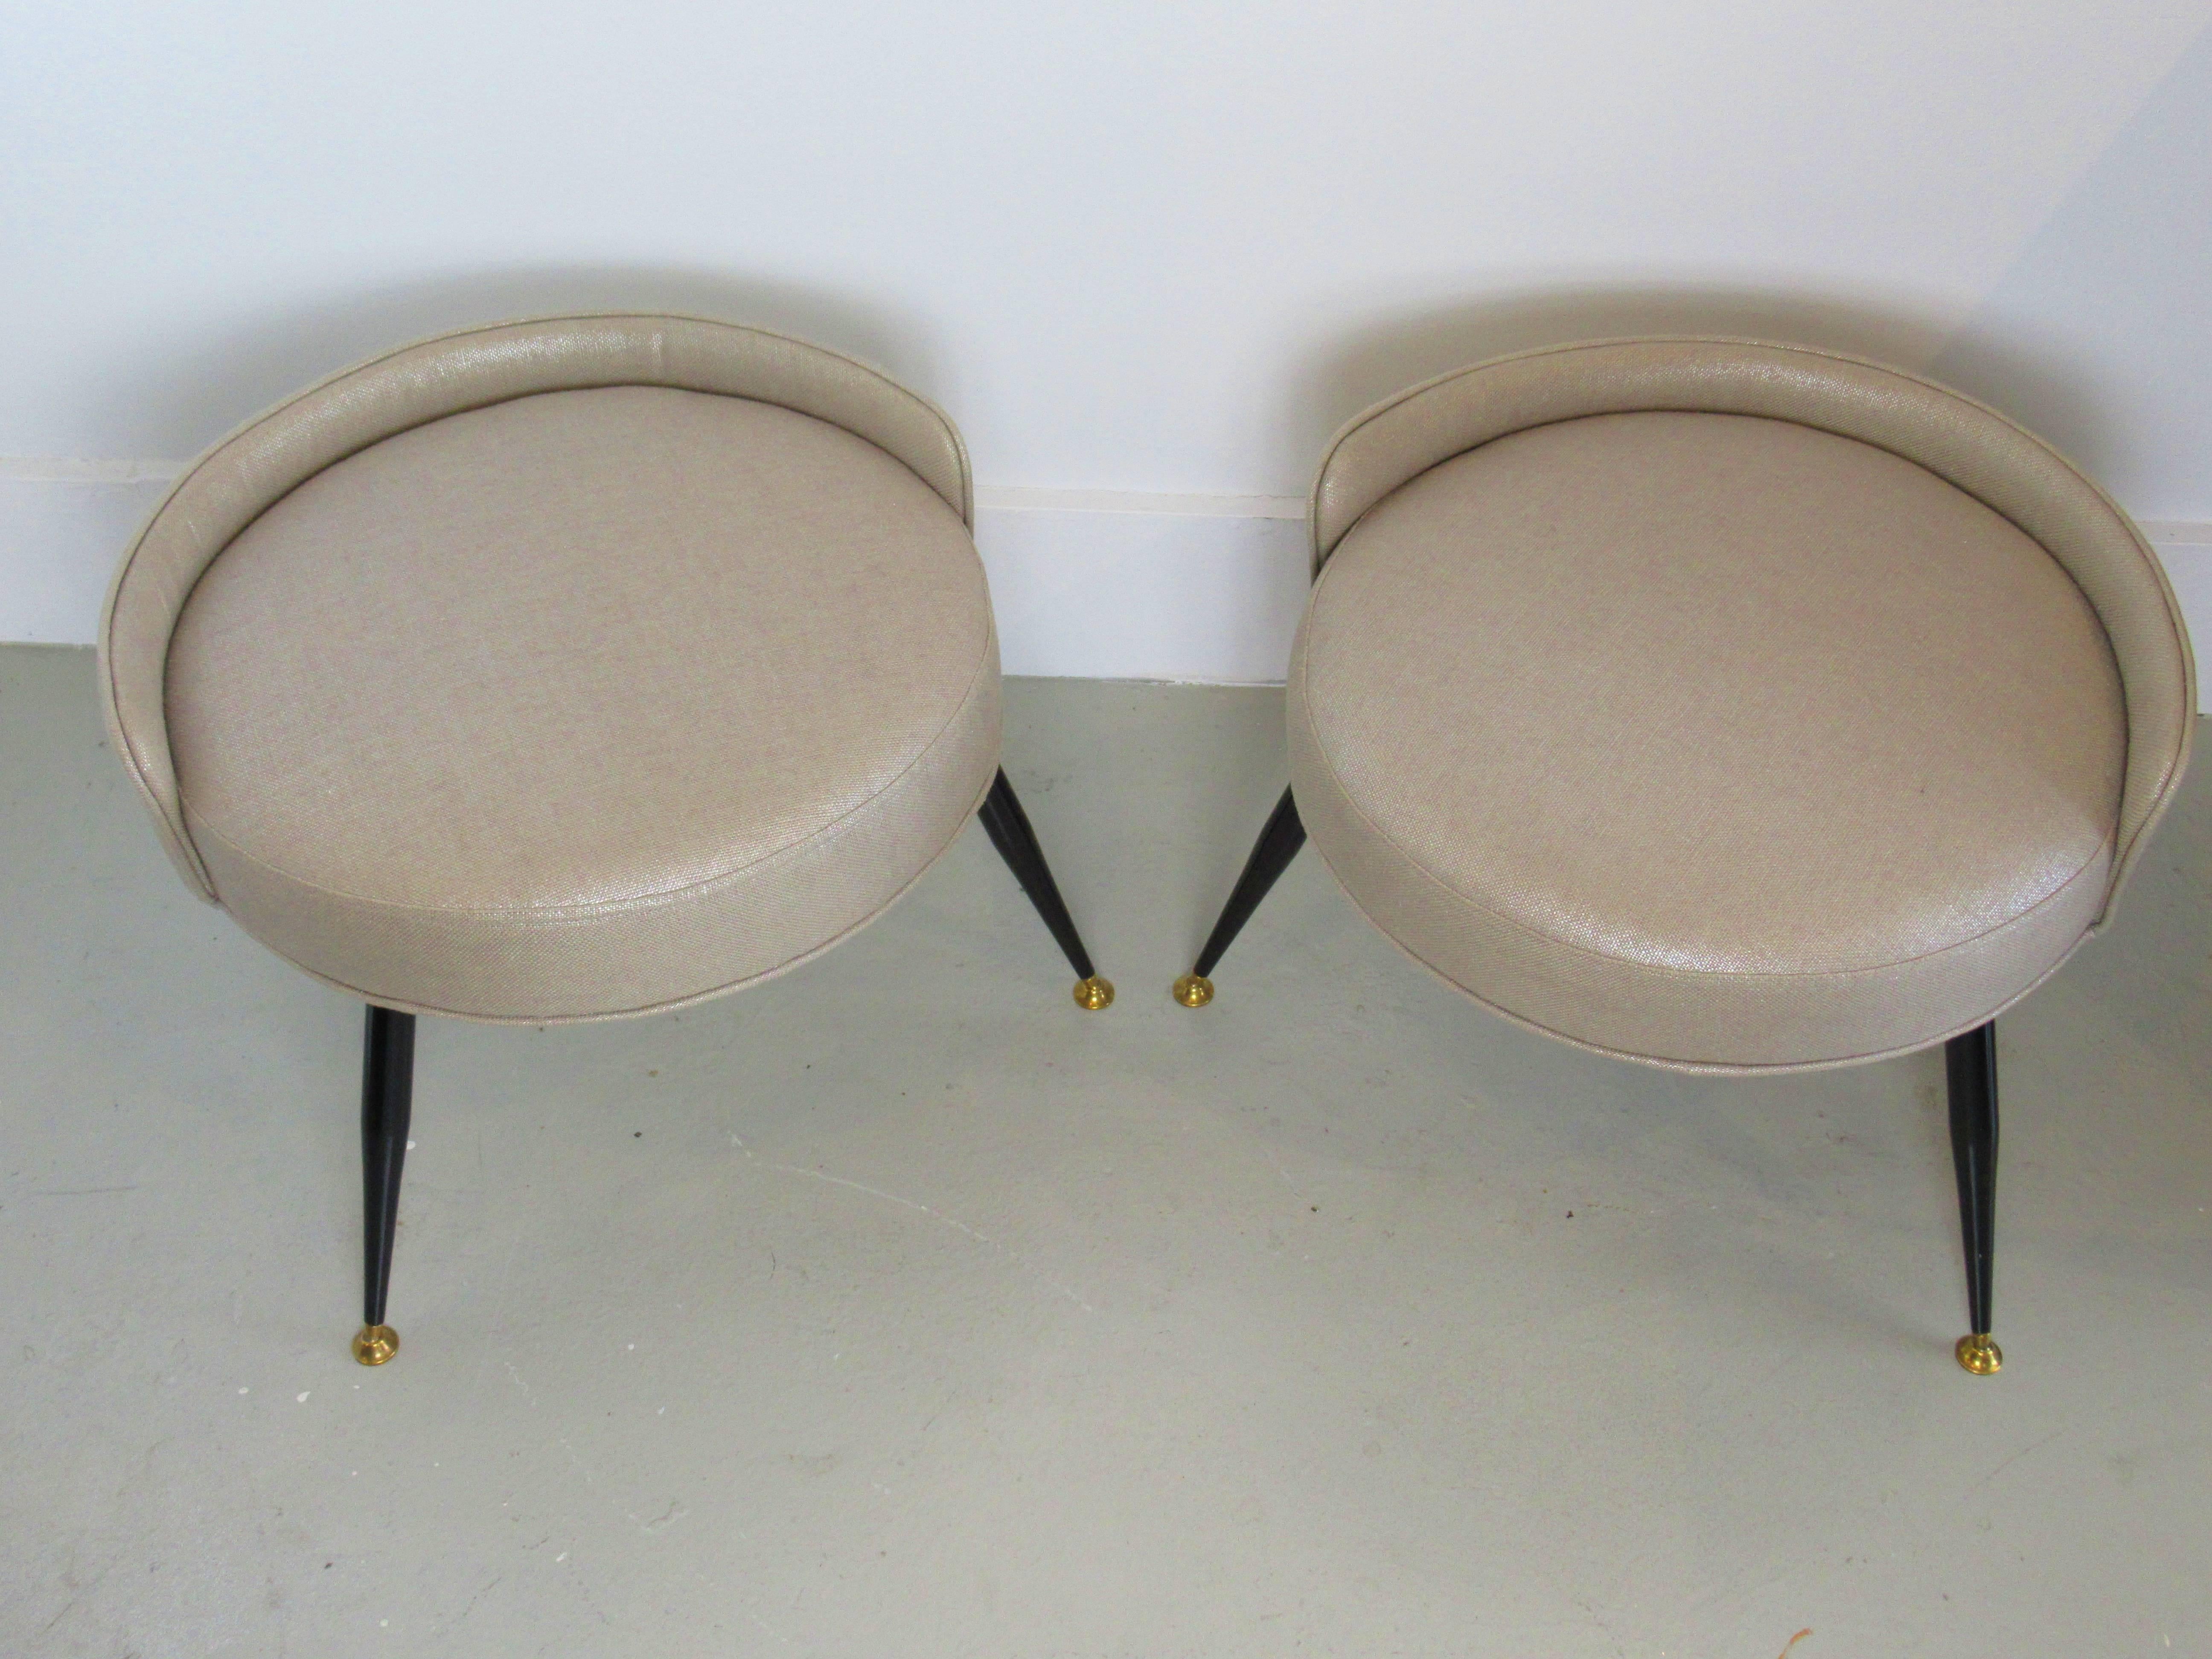 Rare pair of Italian modern splayed leg stools. Attributed to Gastone Rinaldi for RIMA, circa 1958. Excellent condition fully restored. Brass and enameled legs.